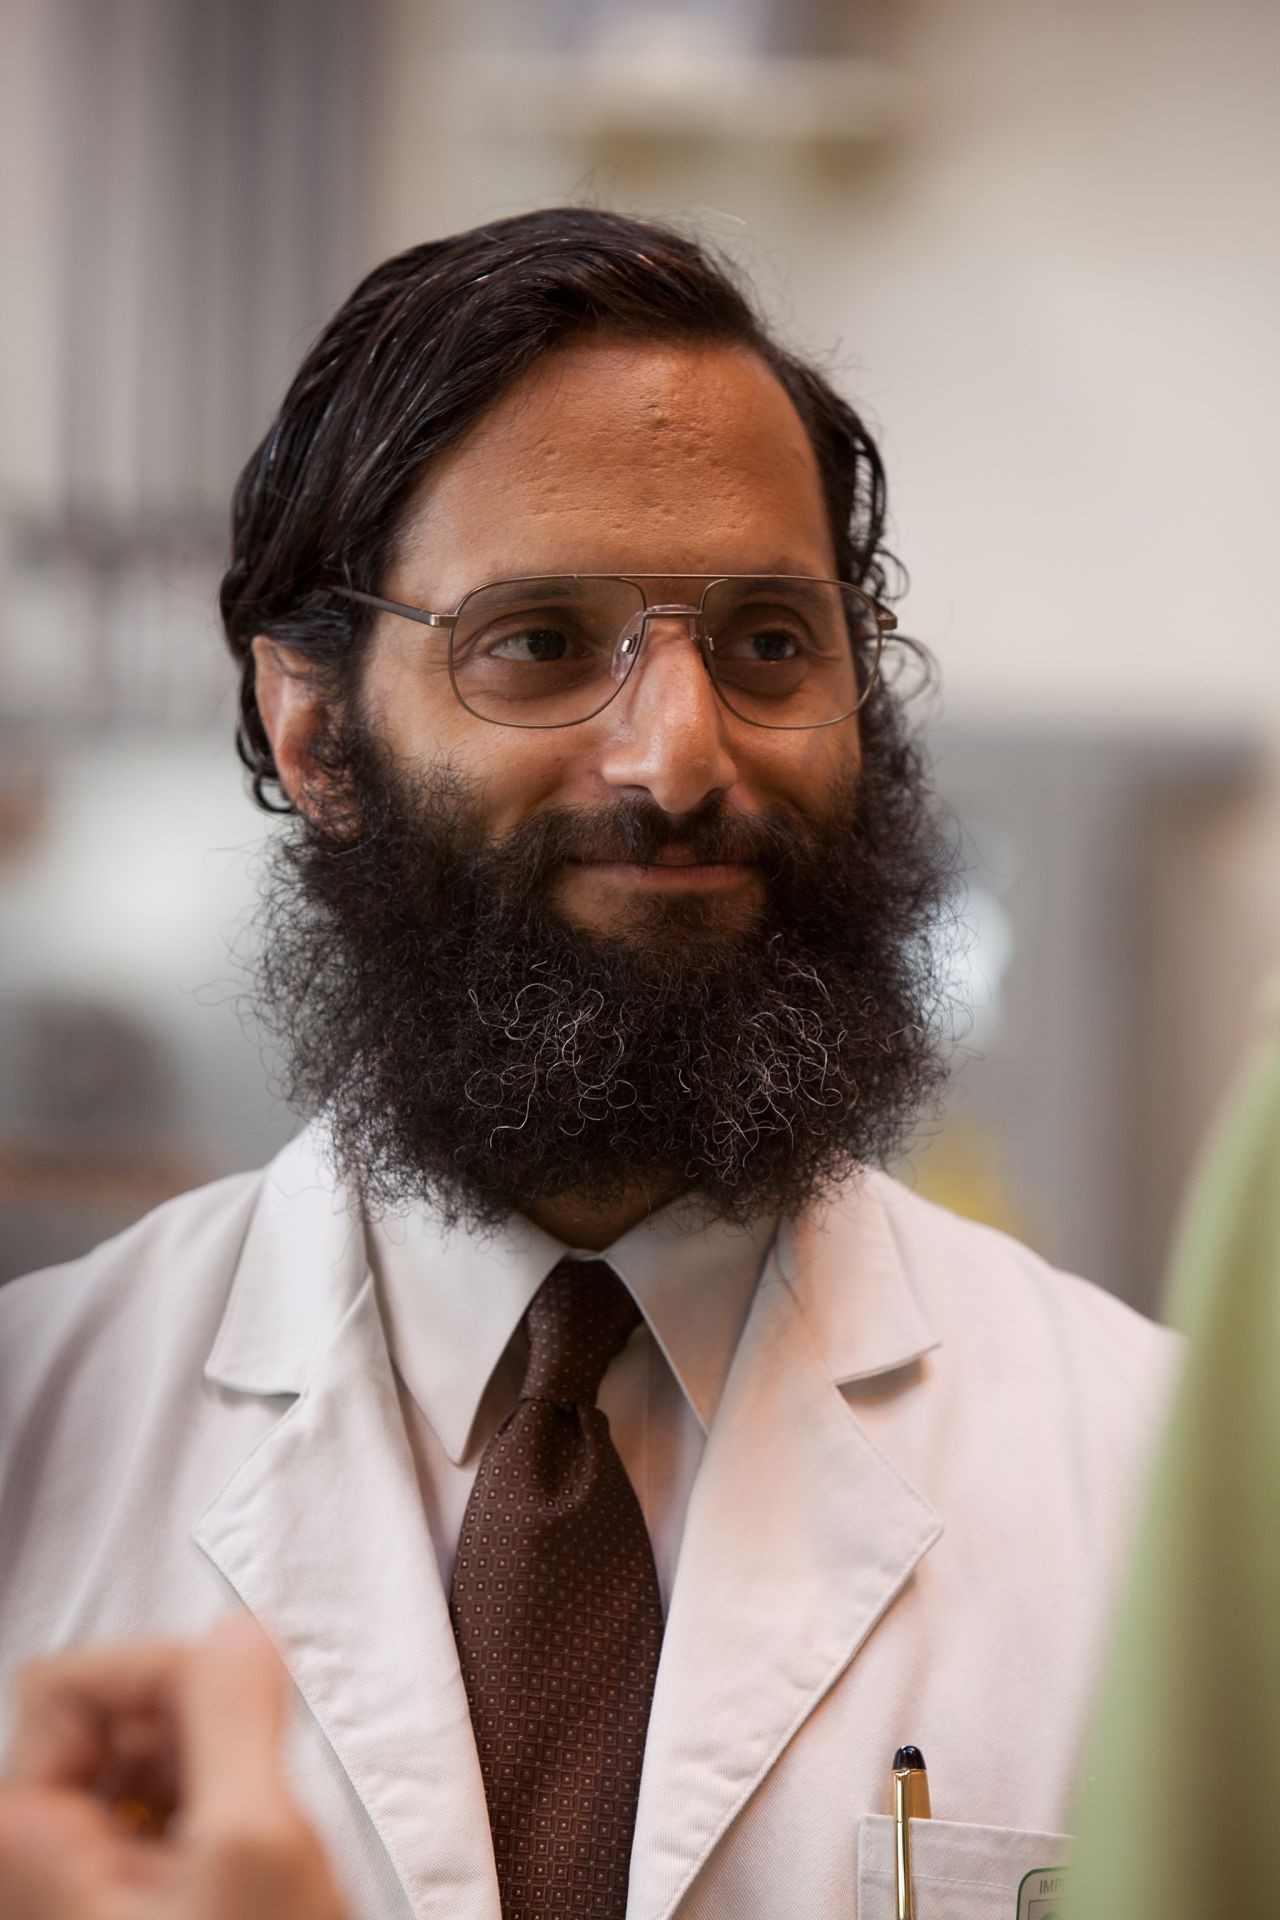 Jason Mantzoukas stars as Nadal in Paramount Pictures' The Dictator (2012). Photo credit by Melinda Sue Gordon.